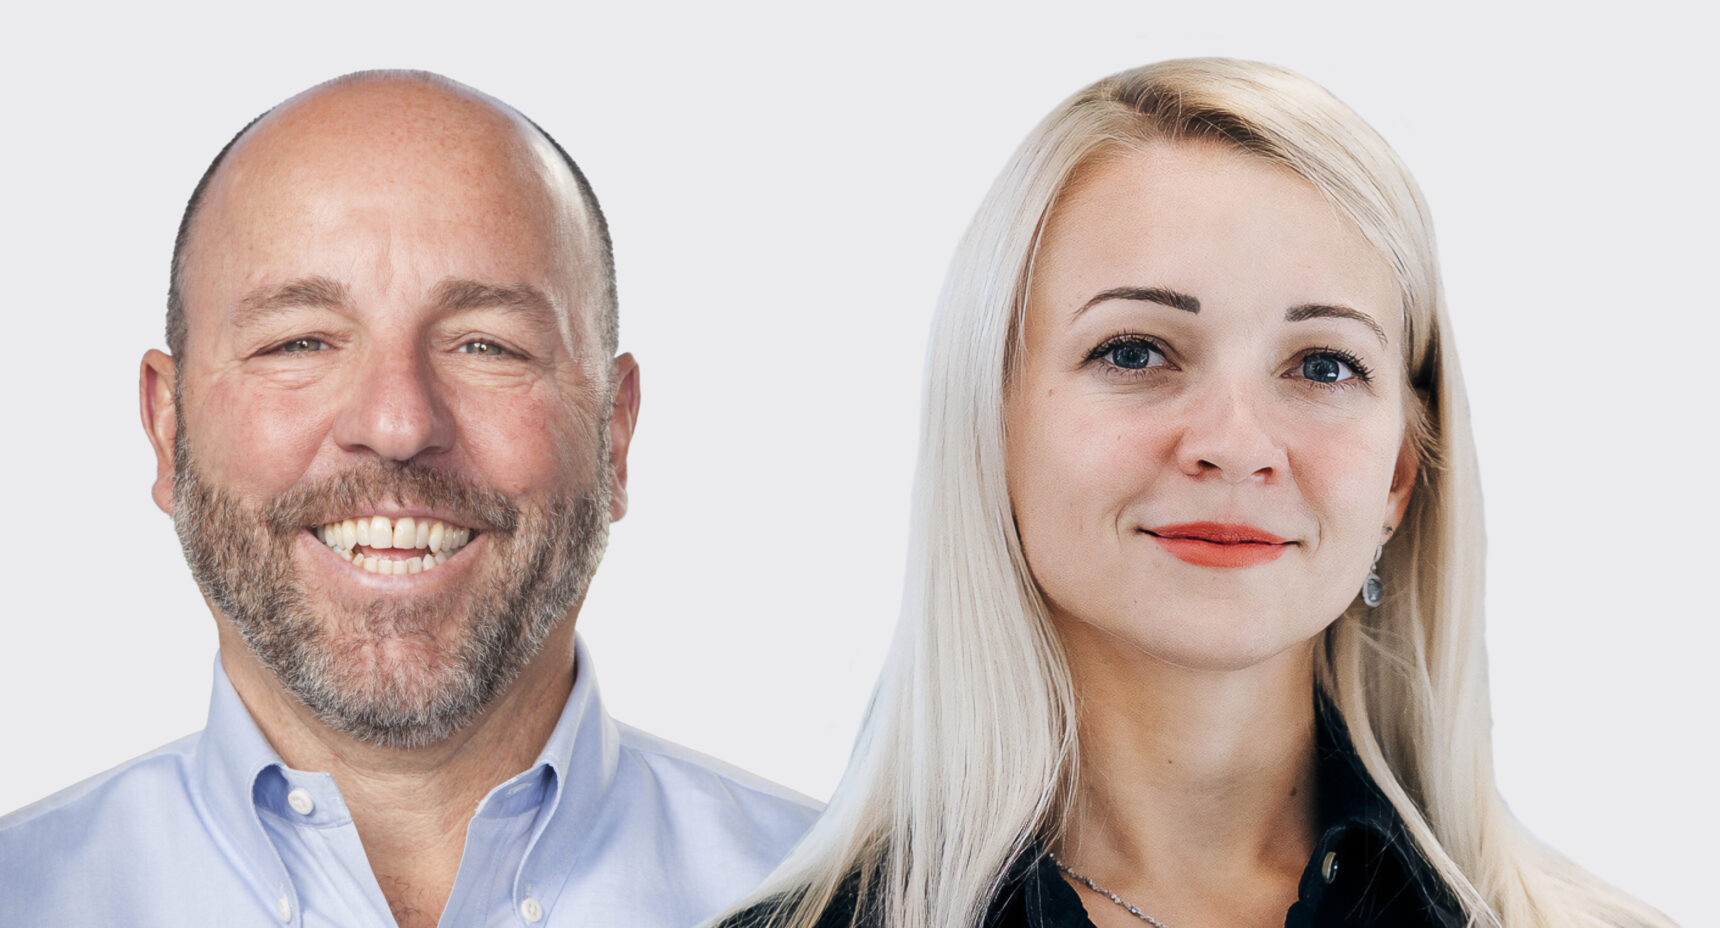 Room 8 Group Appoints New VP of Business Development (Americas) and Head of Business Development (EMEA)